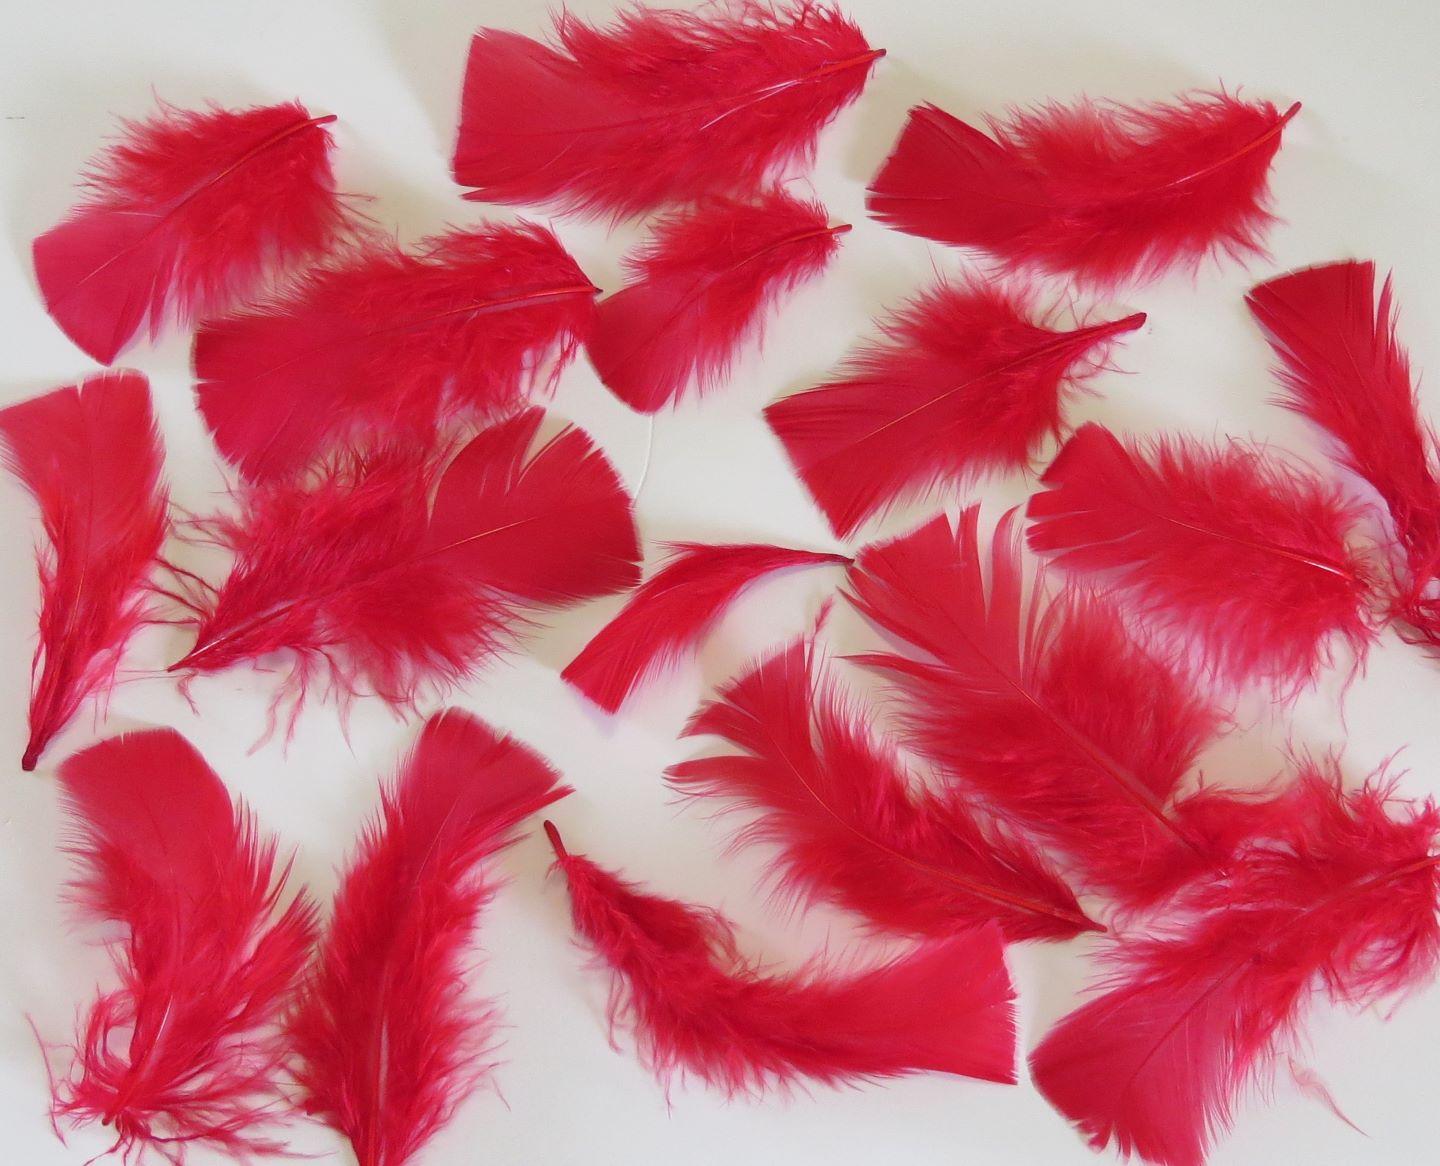 Red Turkey Plumage Feathers - Feathergirl